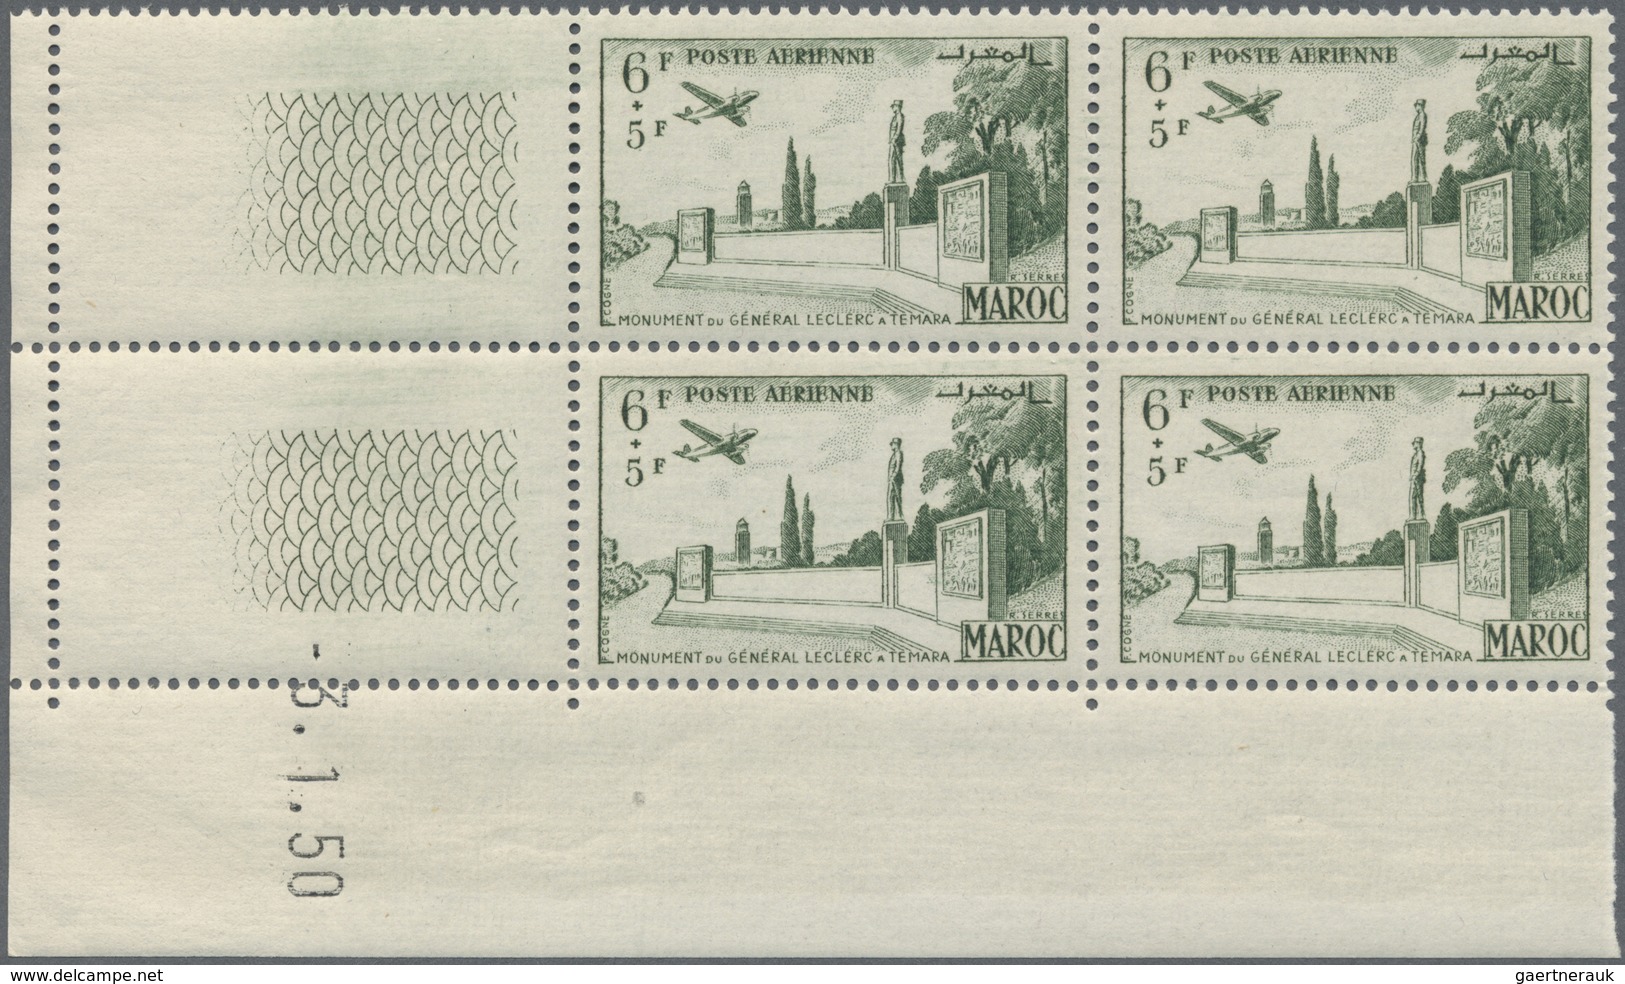 ** Marokko: 1952, Airmails "Leclerc Monument at Temara", 6fr. to 11fr., complete set of four values eac